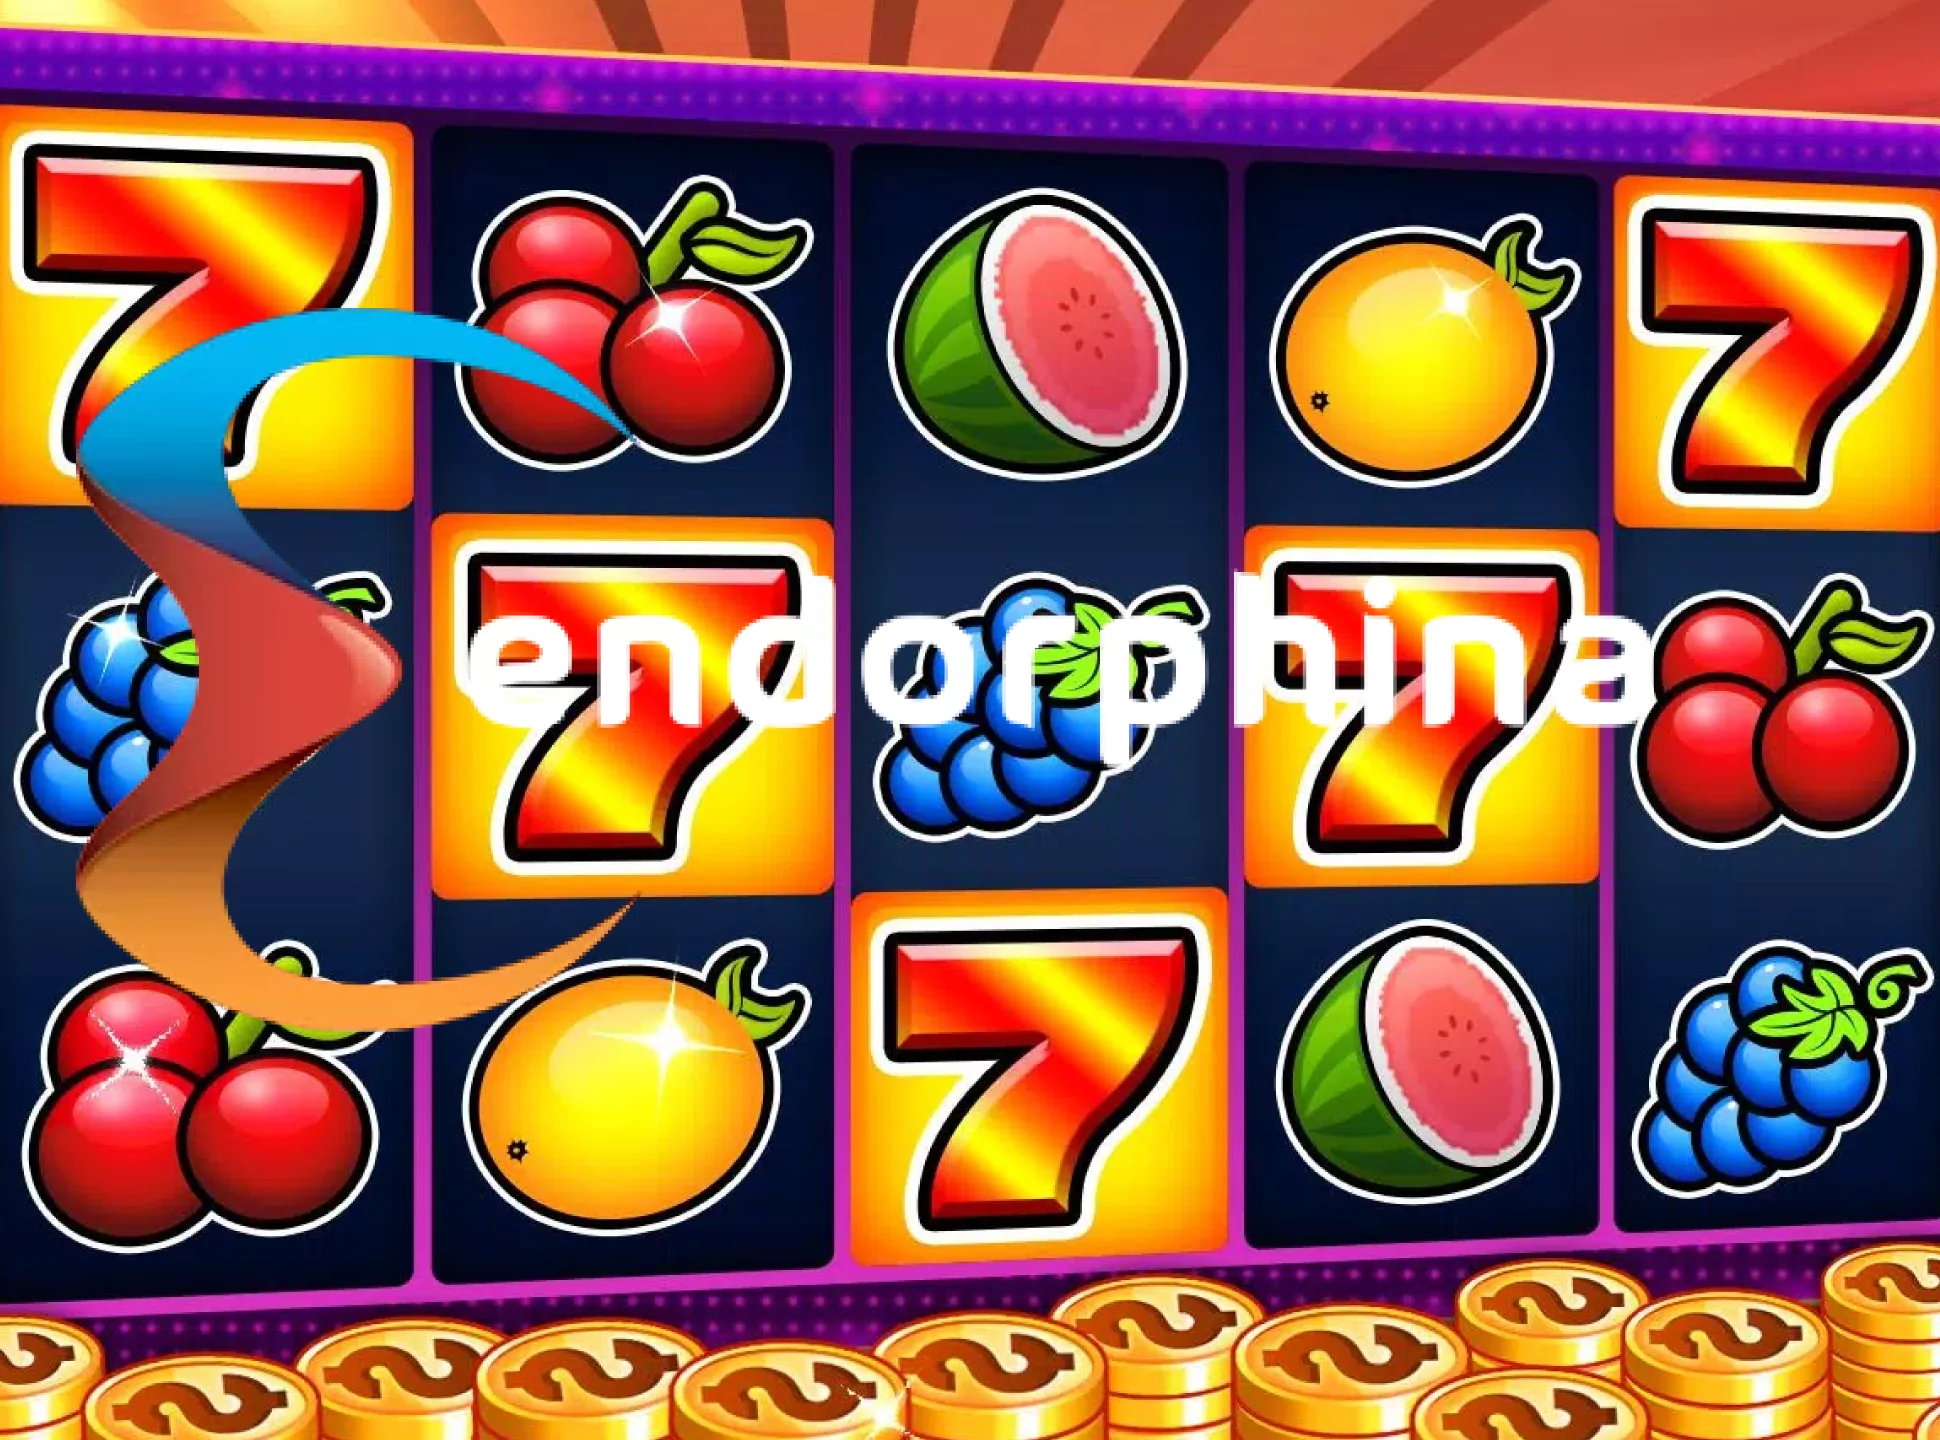 Endorphina is a well-known game developer that provides its games to 1xBet.